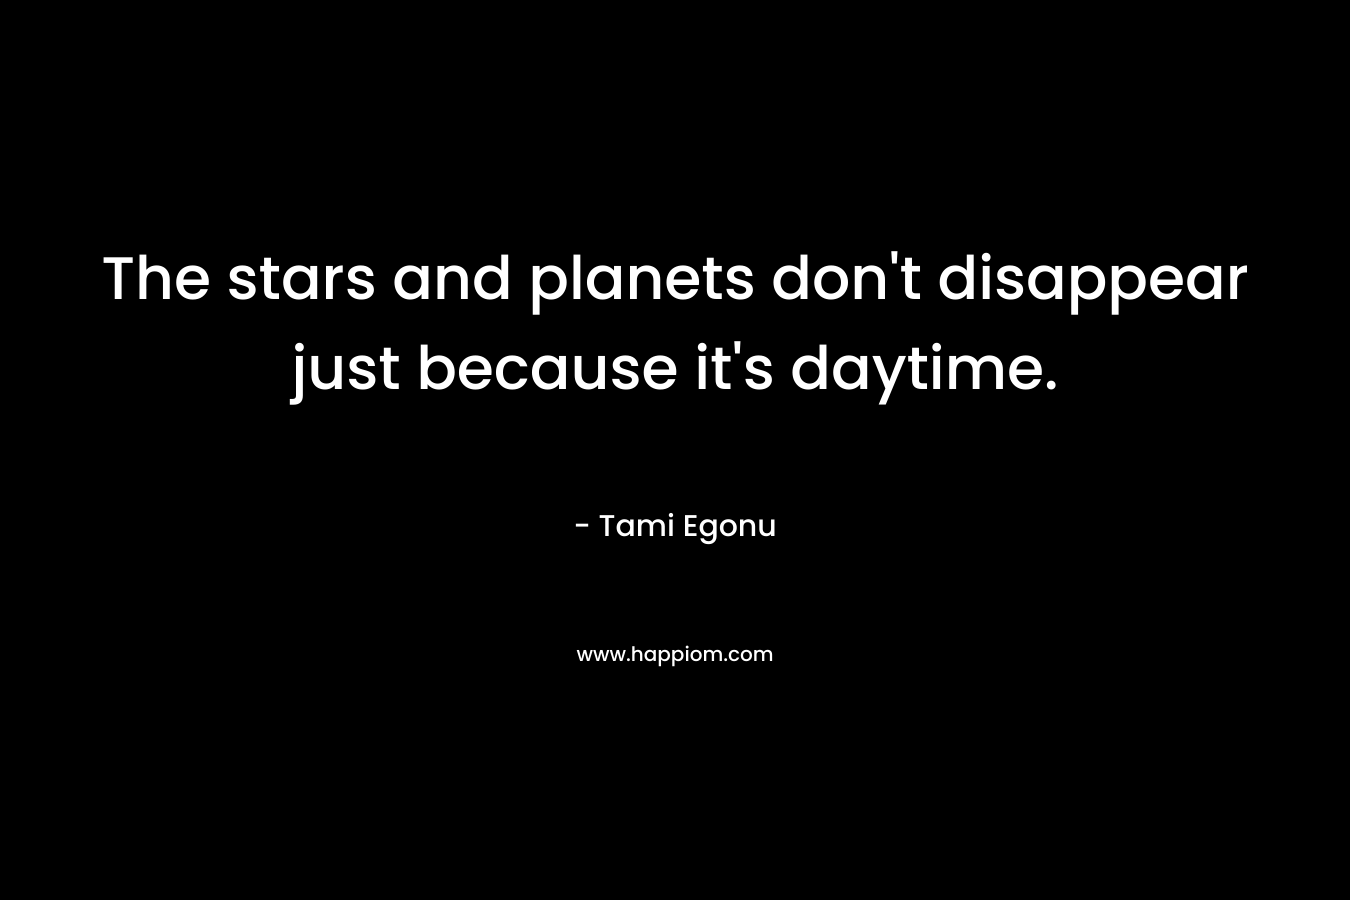 The stars and planets don’t disappear just because it’s daytime. – Tami Egonu